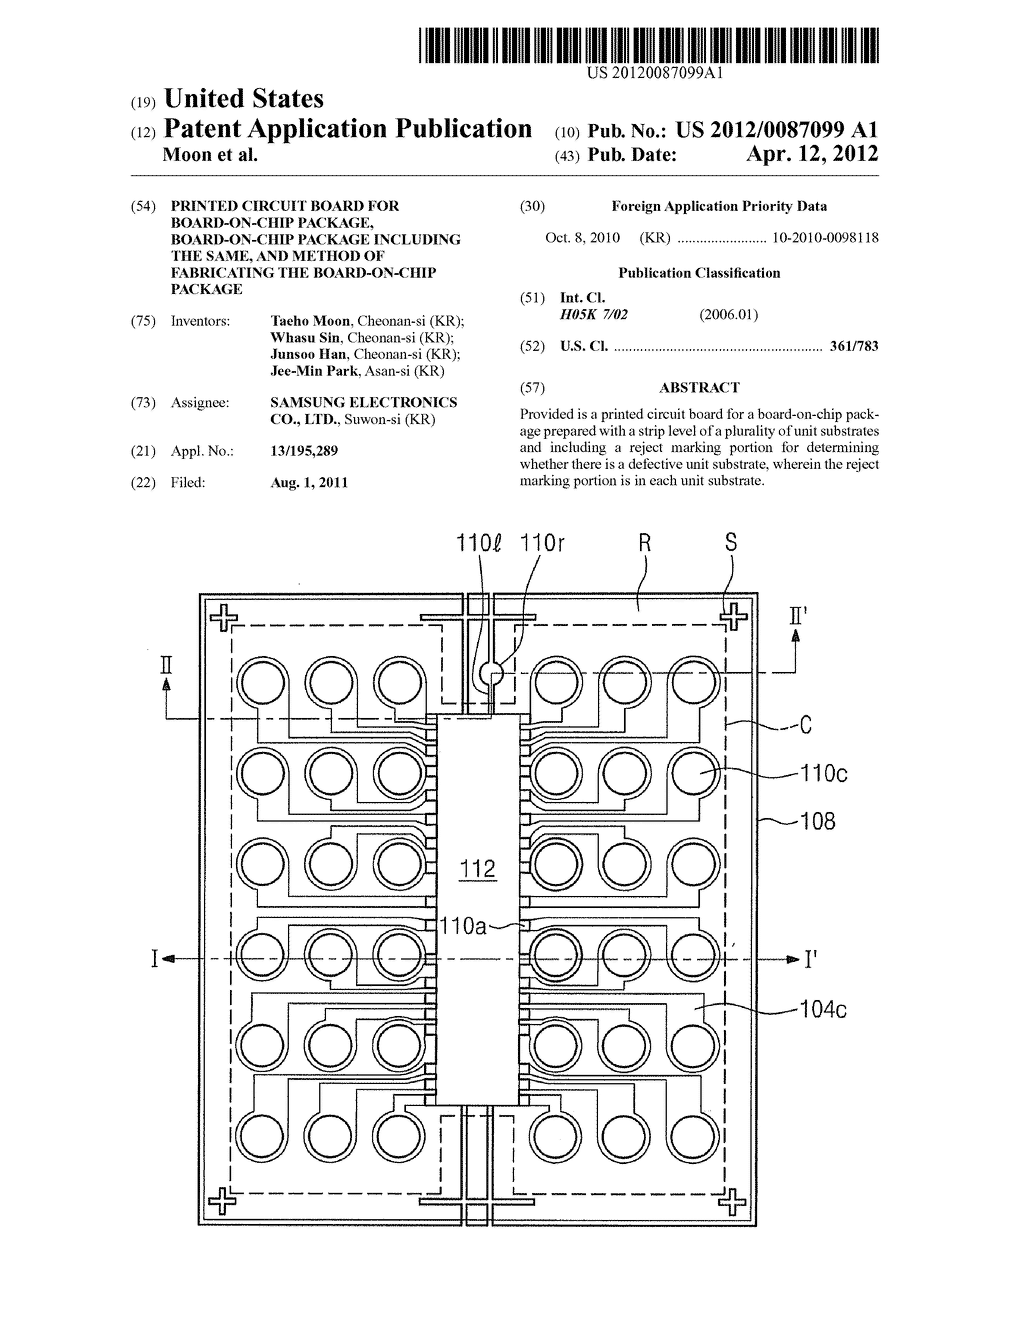 Printed Circuit Board For Board-On-Chip Package, Board-On-Chip Package     Including The Same, And Method Of Fabricating The Board-On-Chip Package - diagram, schematic, and image 01